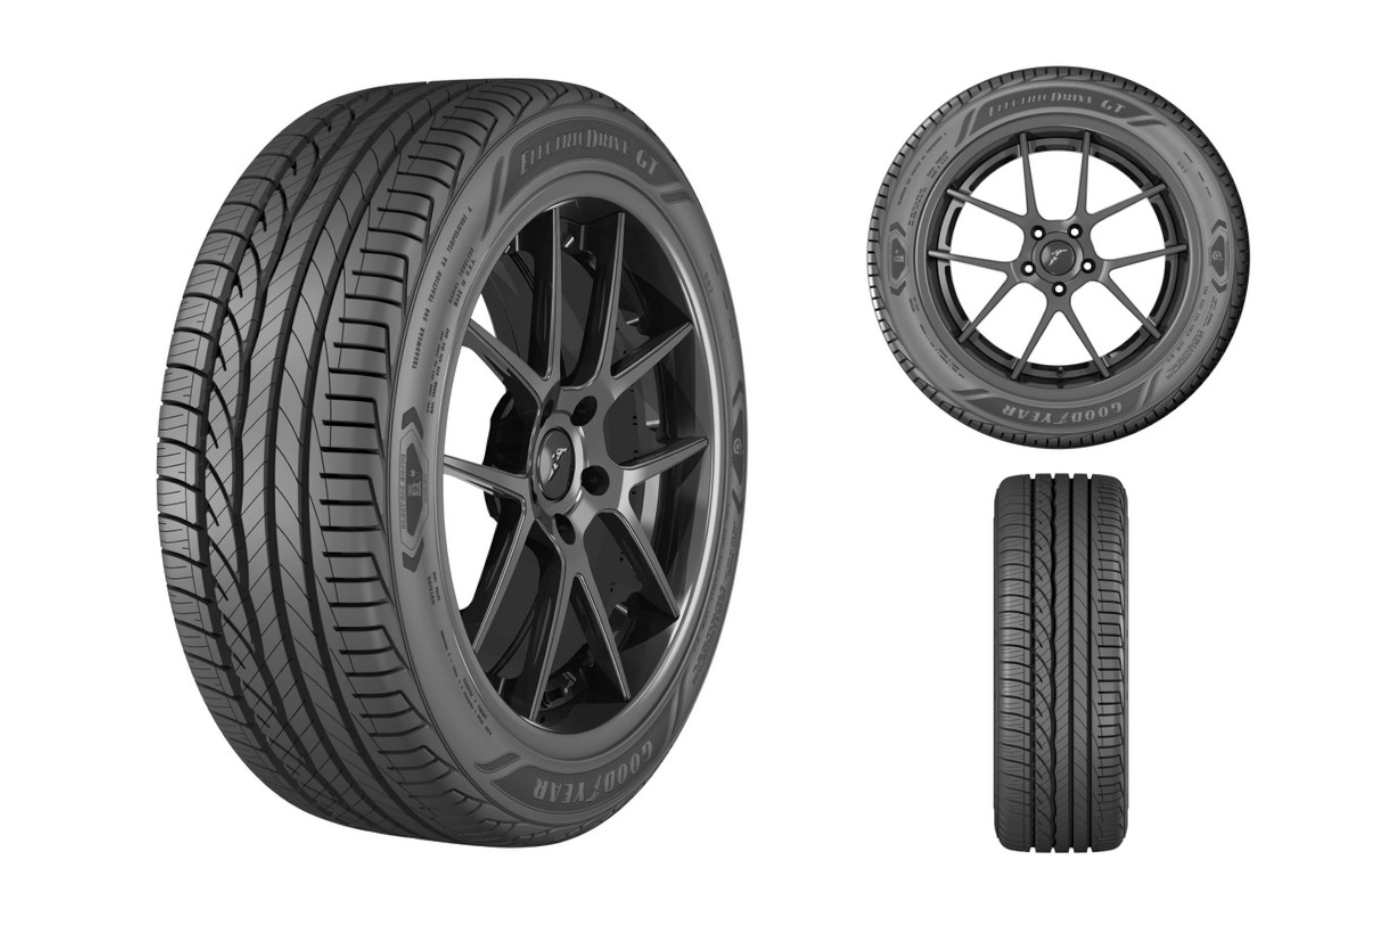 Goodyear electricdrive GT